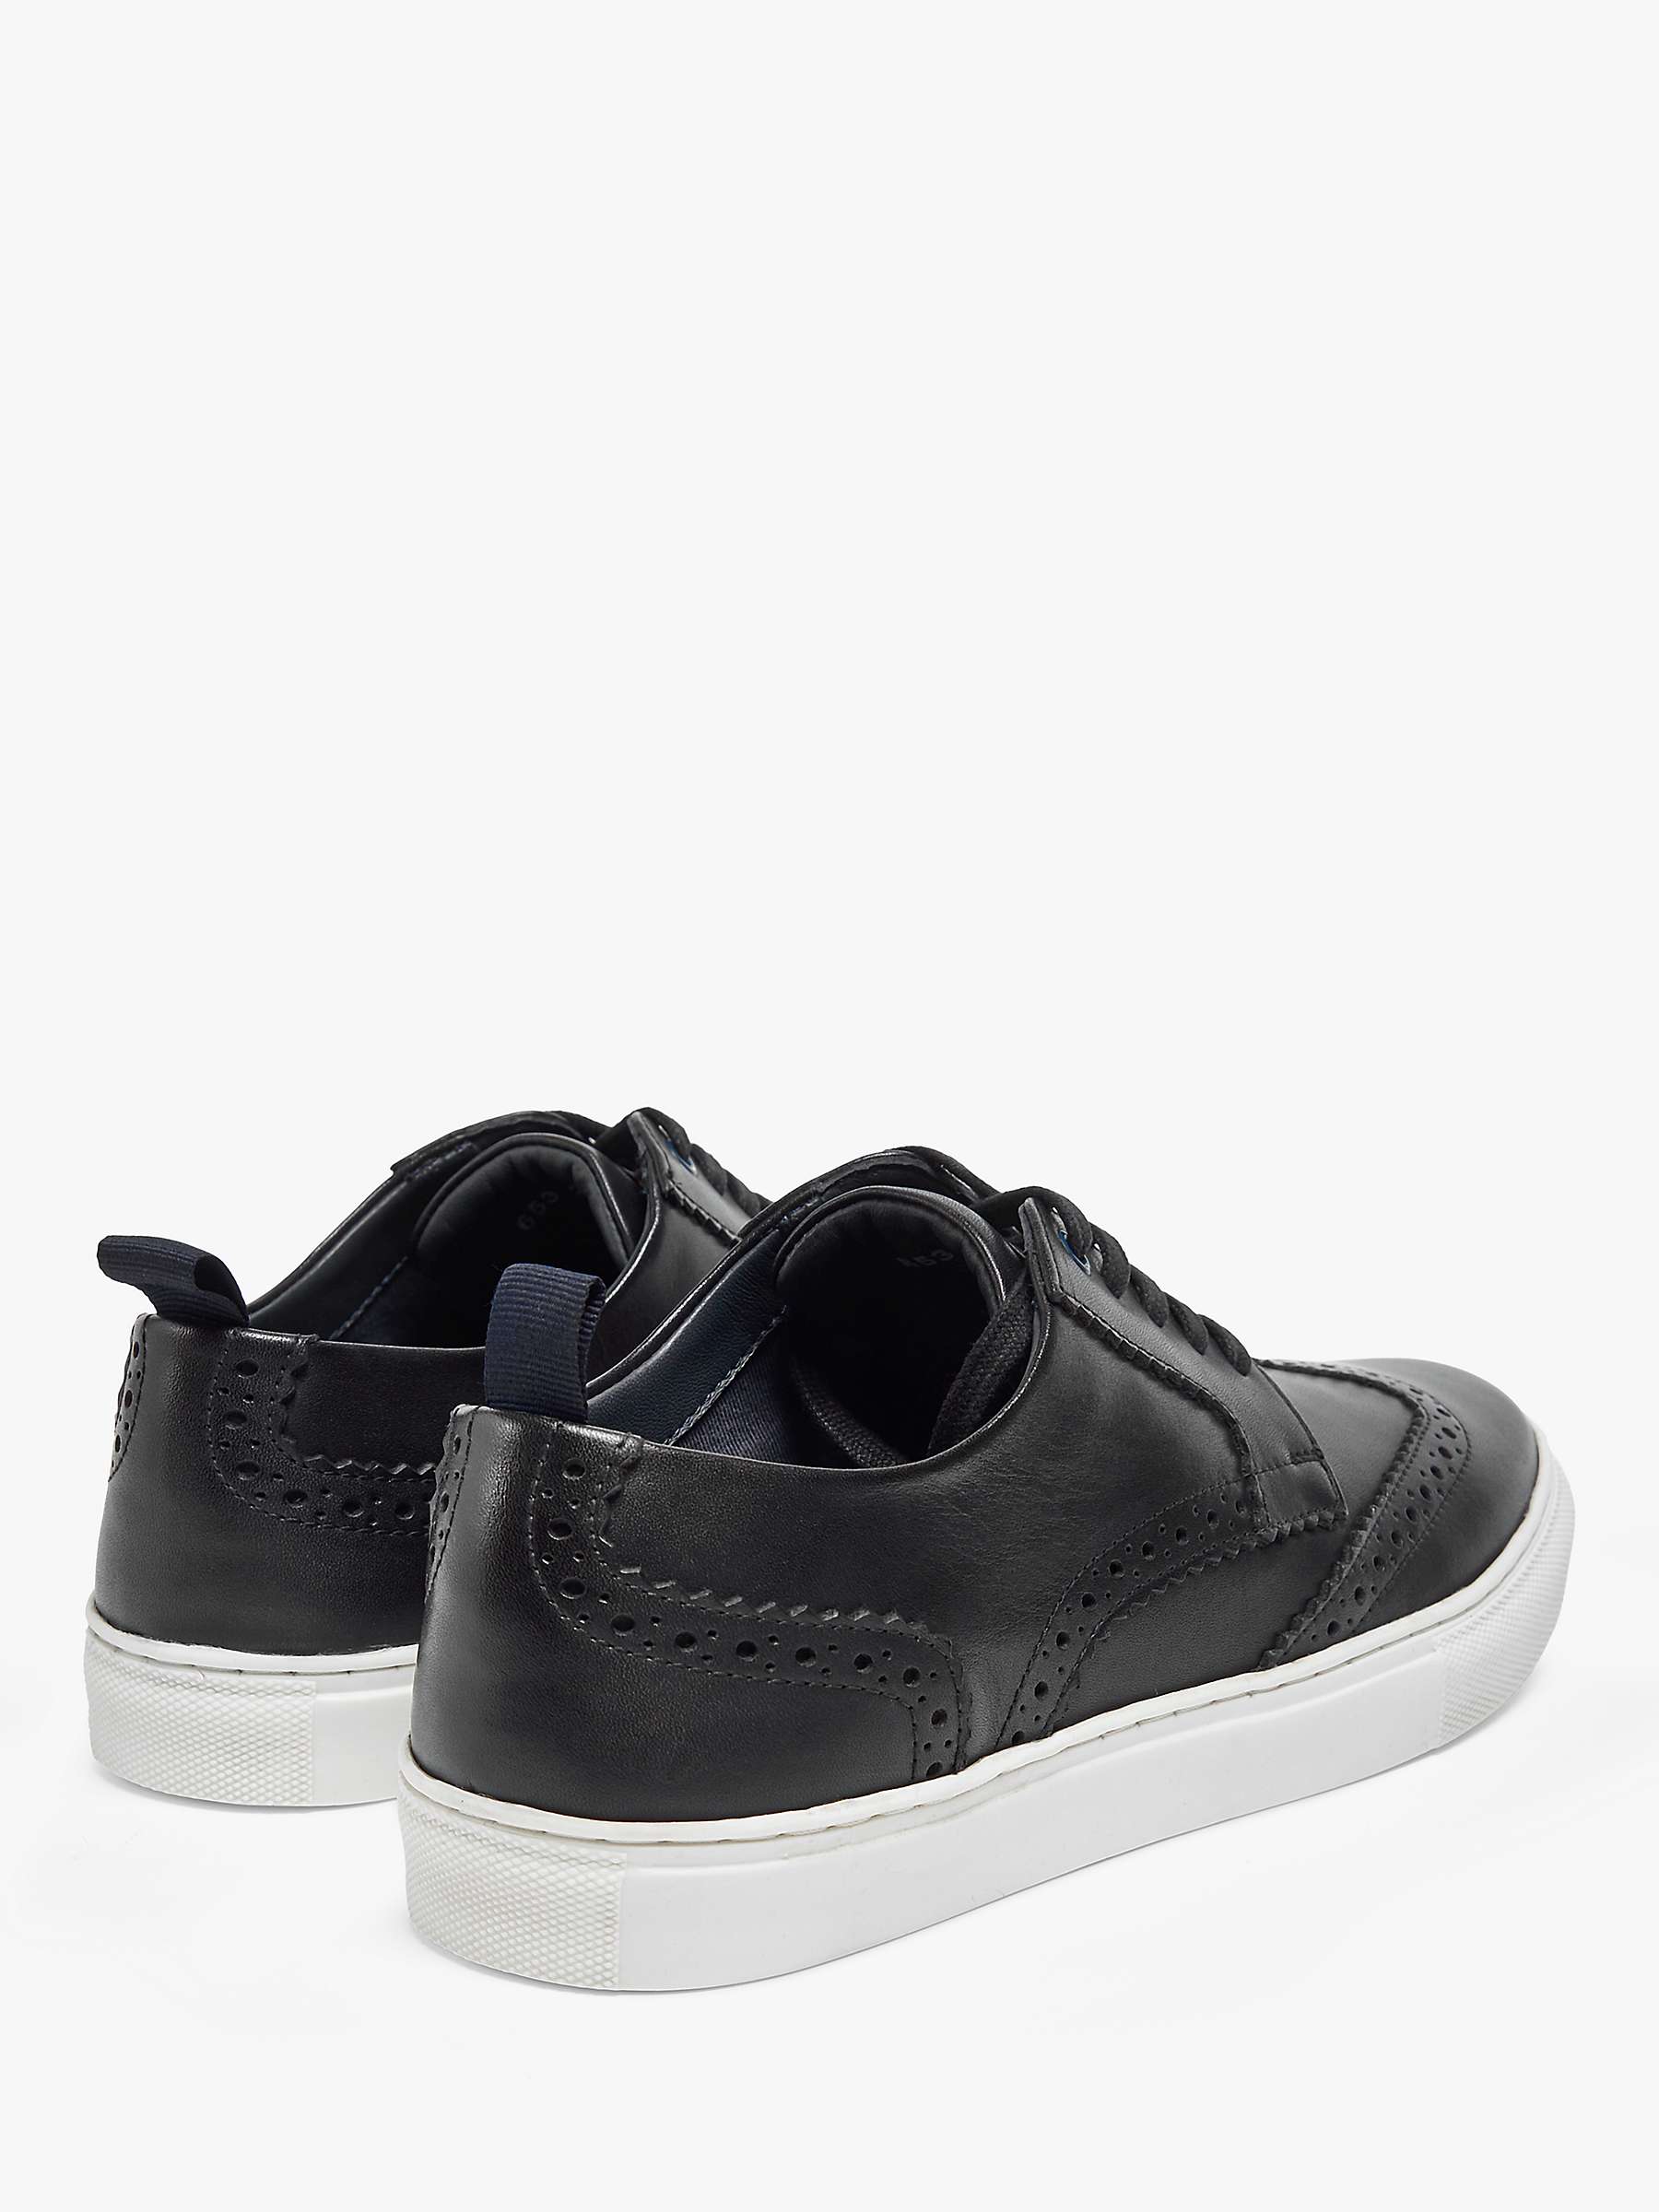 Buy Pod Foley Leather Brogue Trainers Online at johnlewis.com